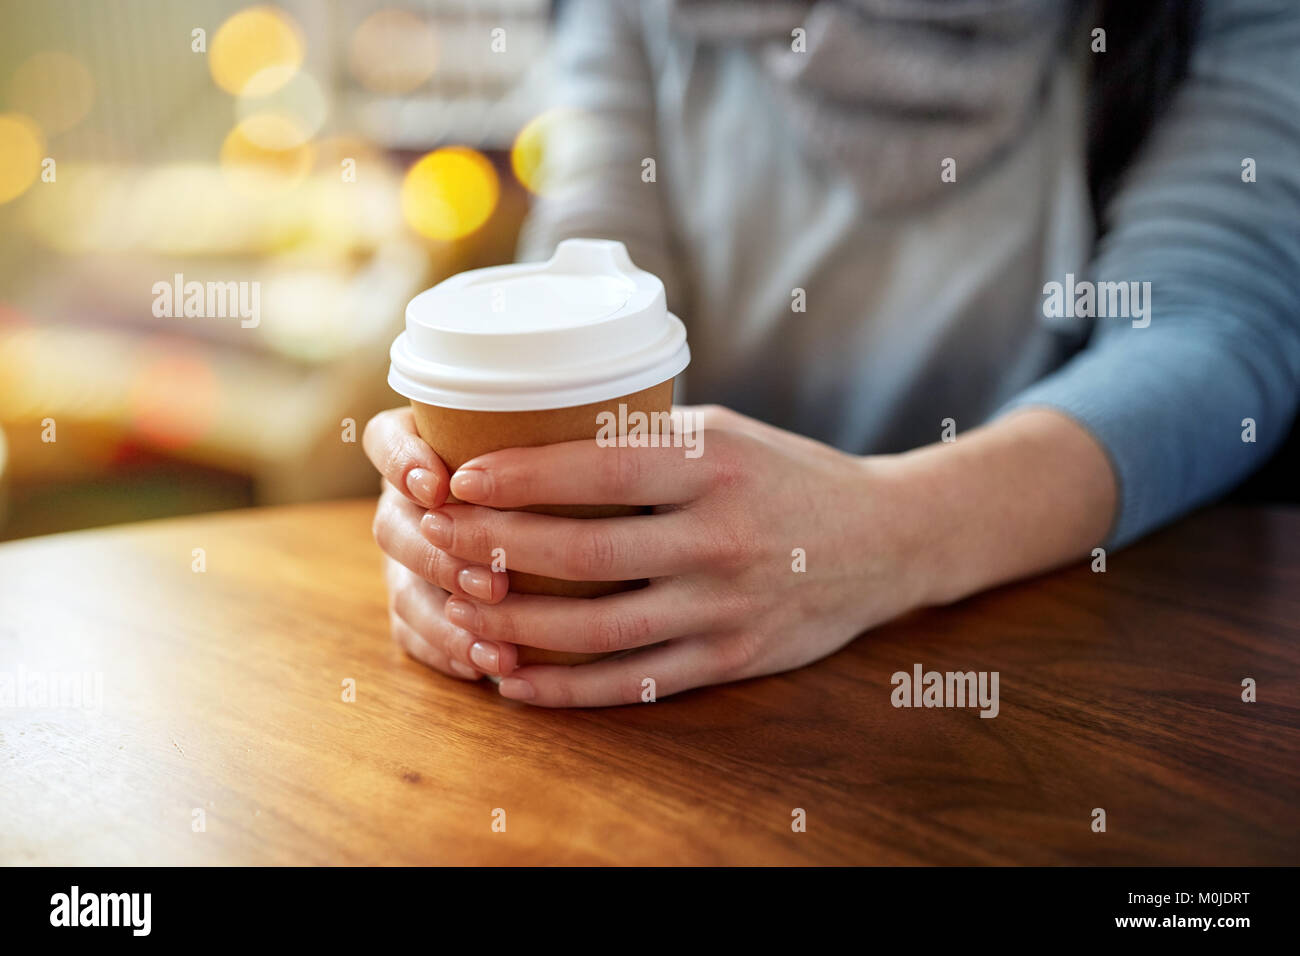 close up of young woman with paper coffee cup Stock Photo